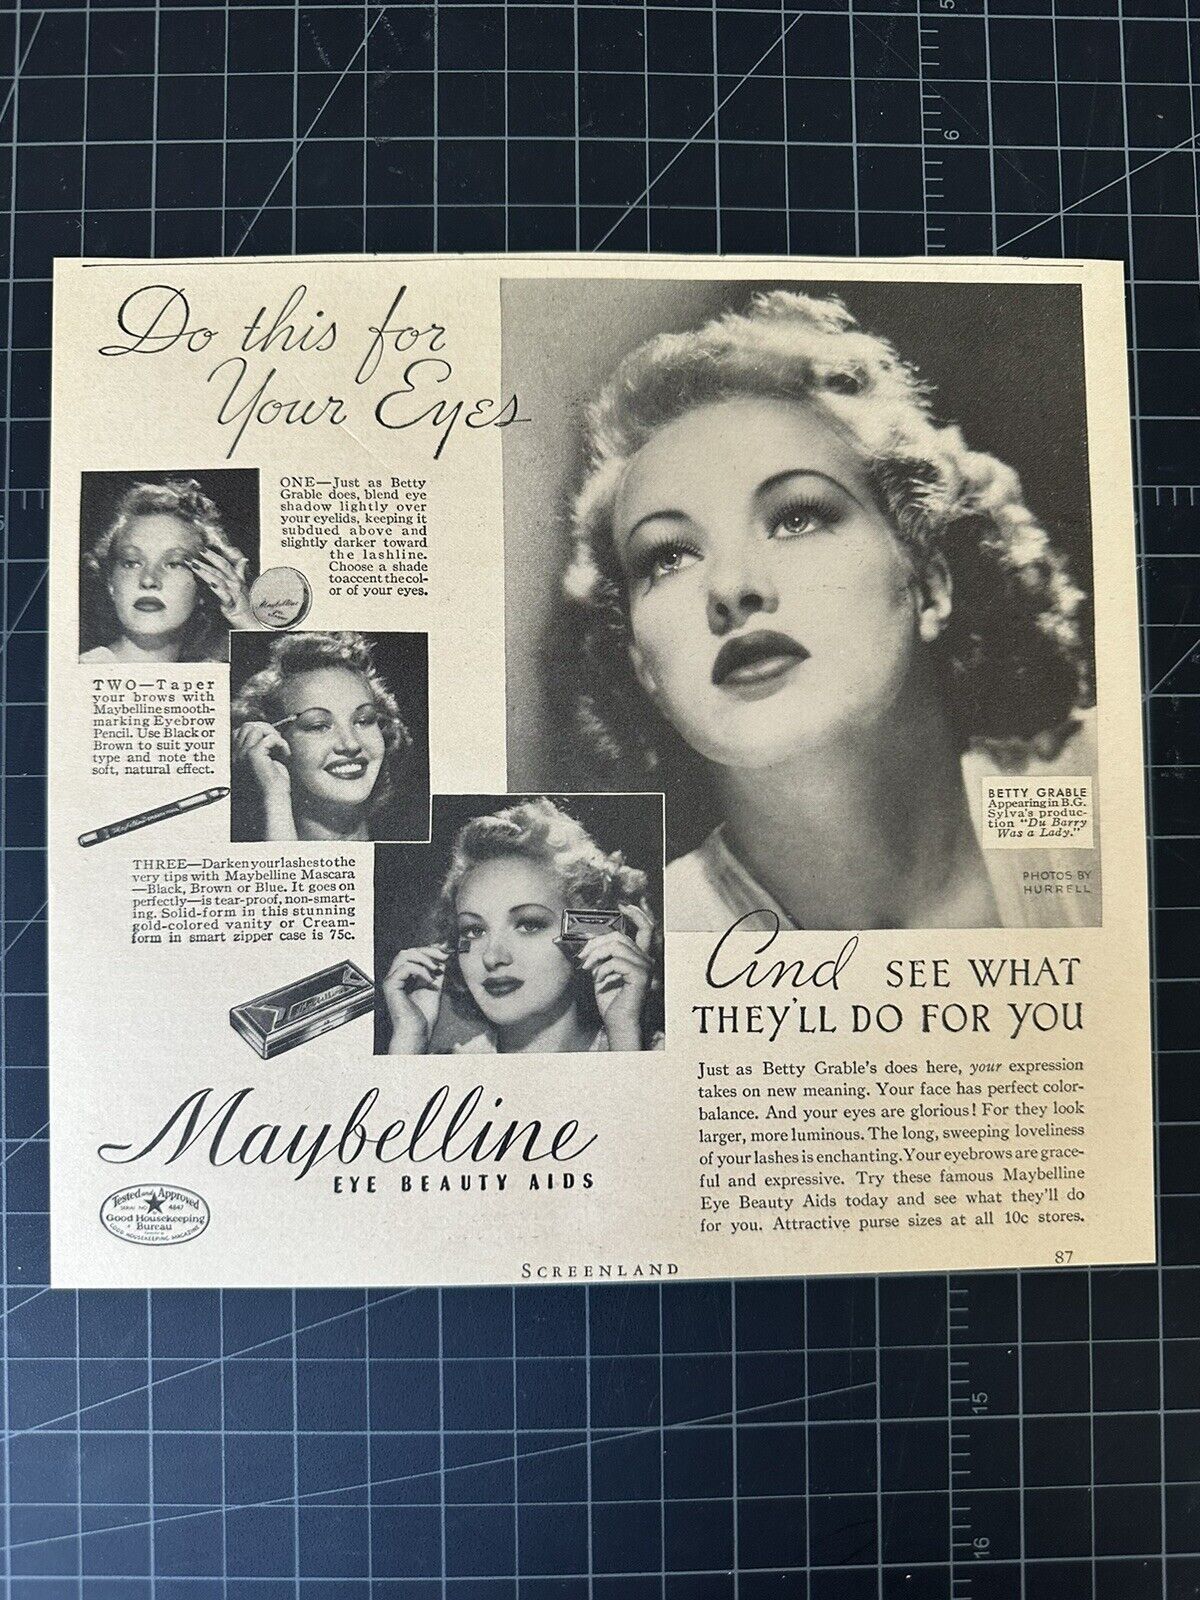 Vintage 1940s Maybelline Cosmetics Print Ad - Betty Grable